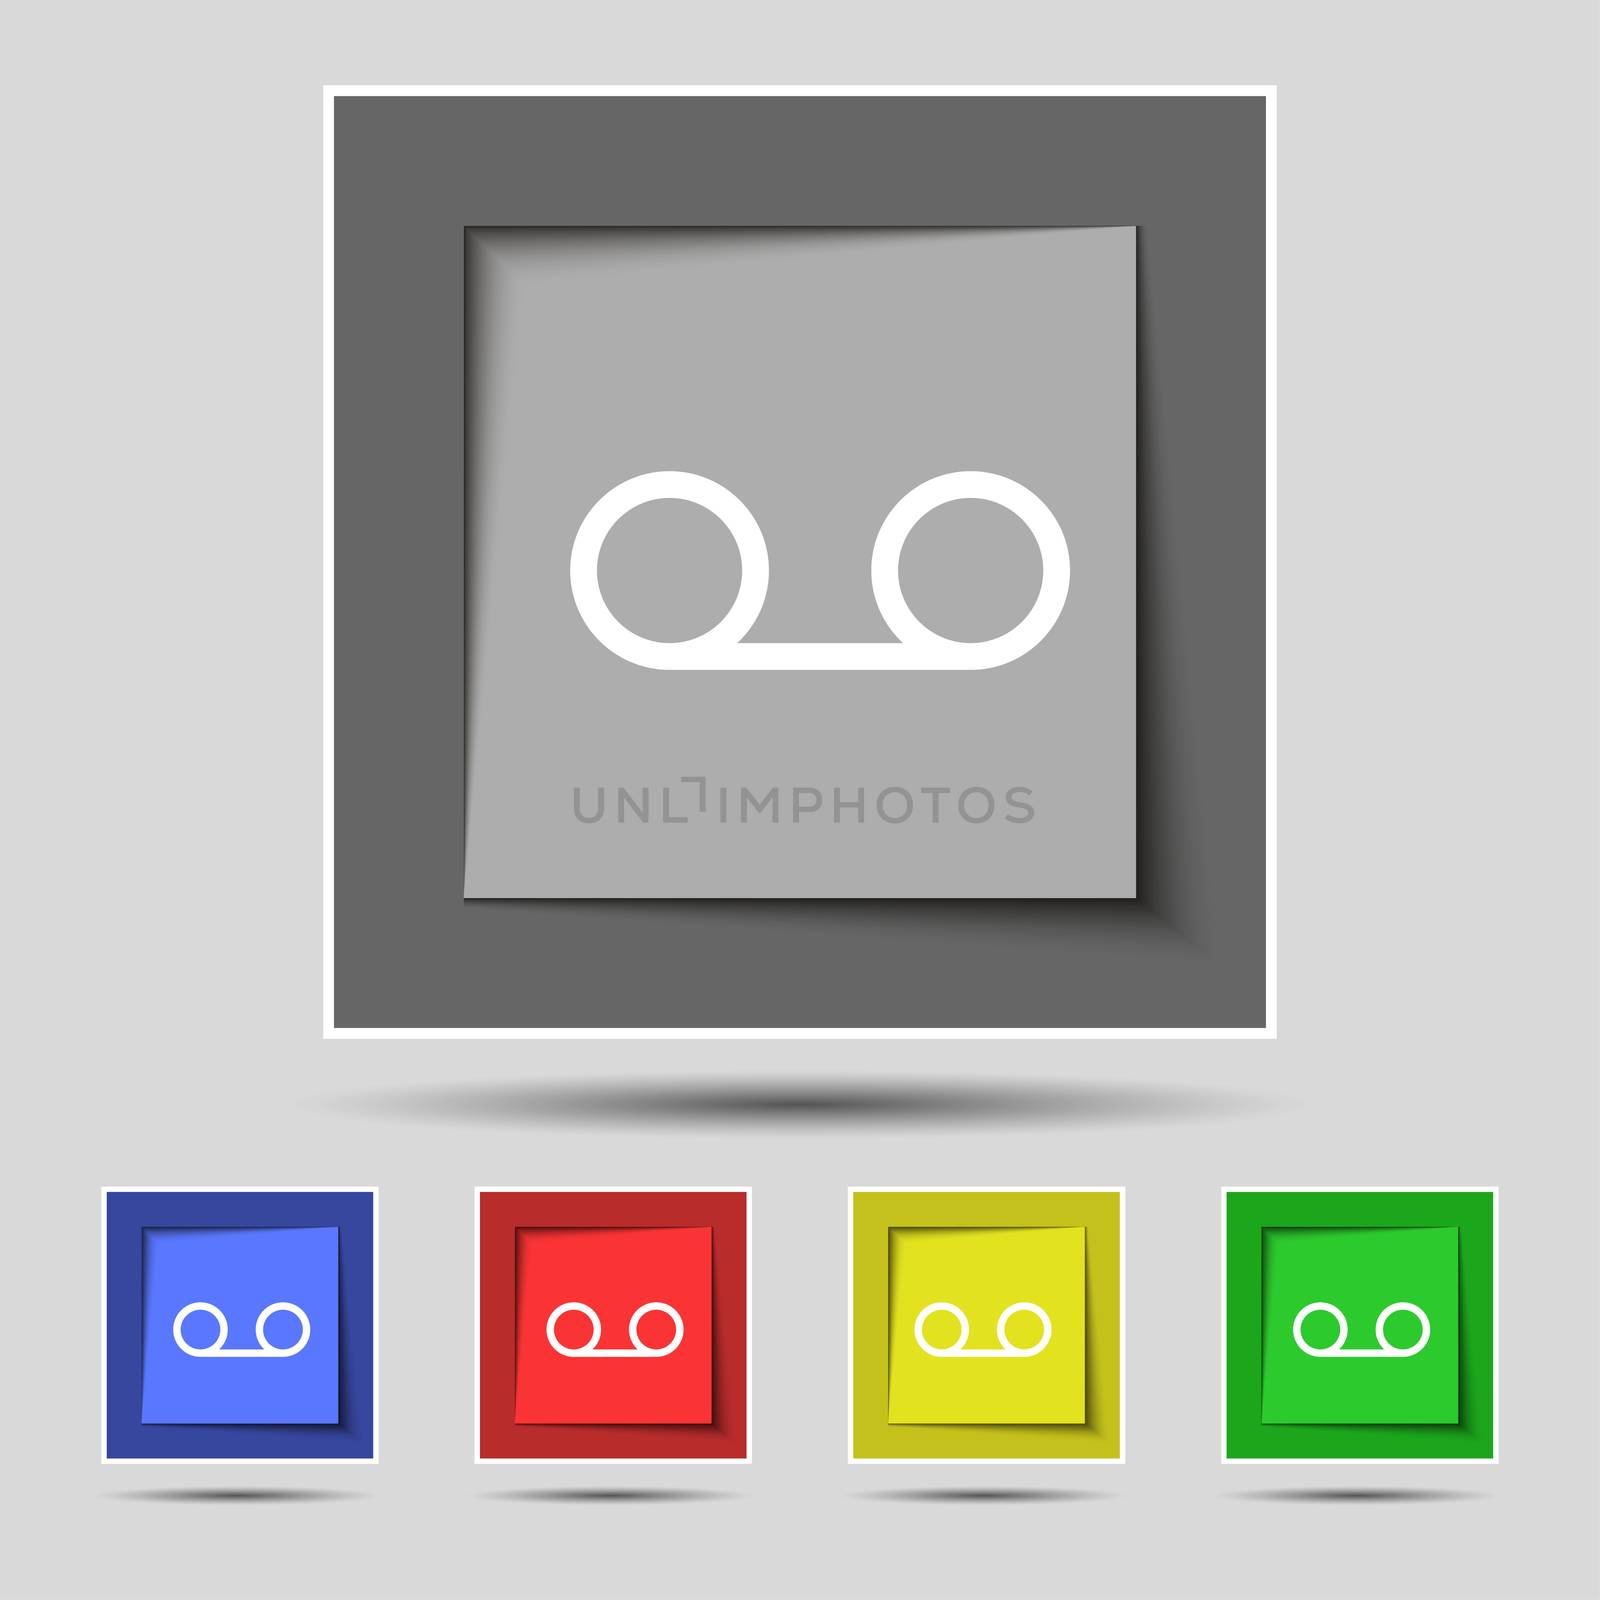 audio cassette icon sign on original five colored buttons. illustration